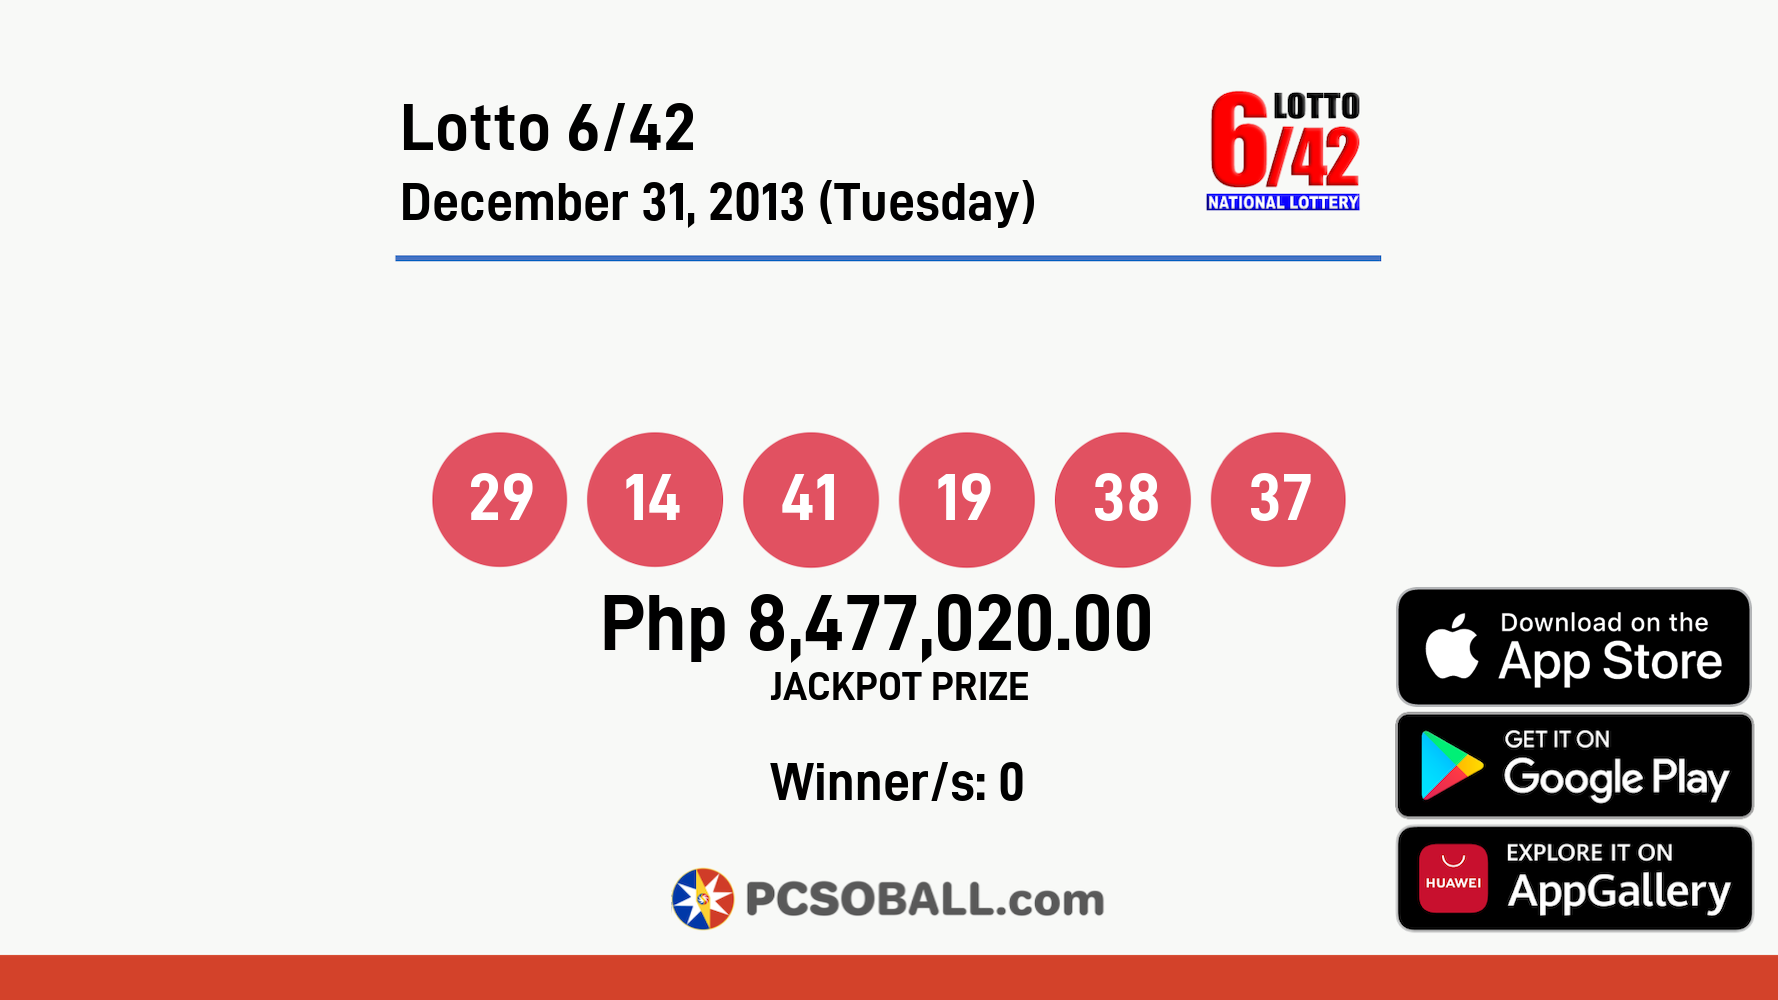 Lotto 6/42 December 31, 2013 (Tuesday) Result